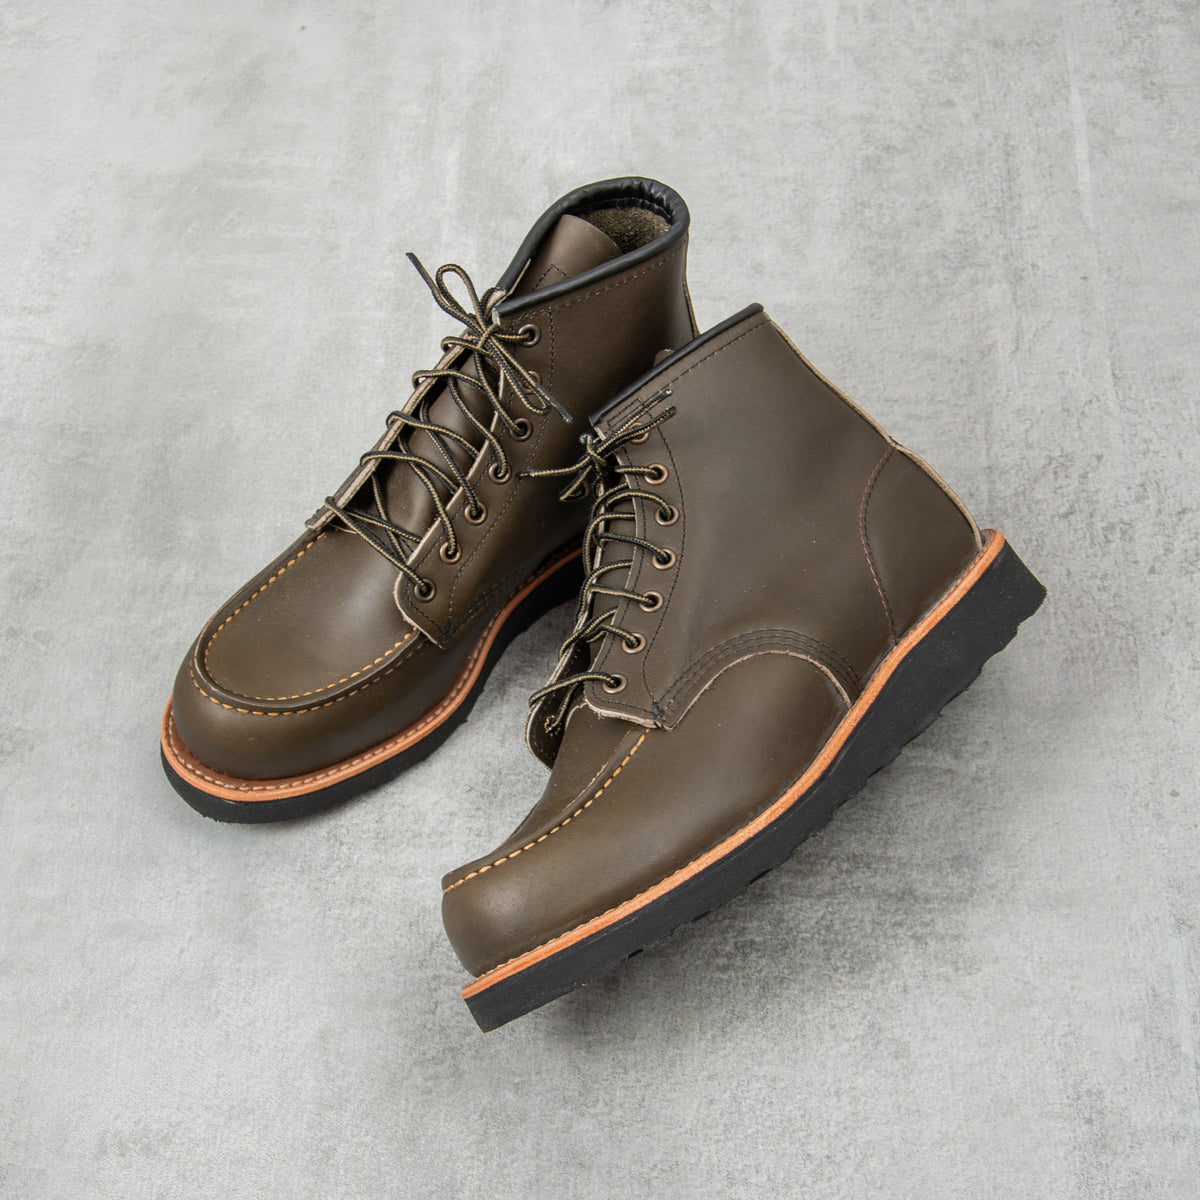 Buy Red Wing Classic Moc Toe Boot 8828 - Alpine Portage@Union Clothing ...